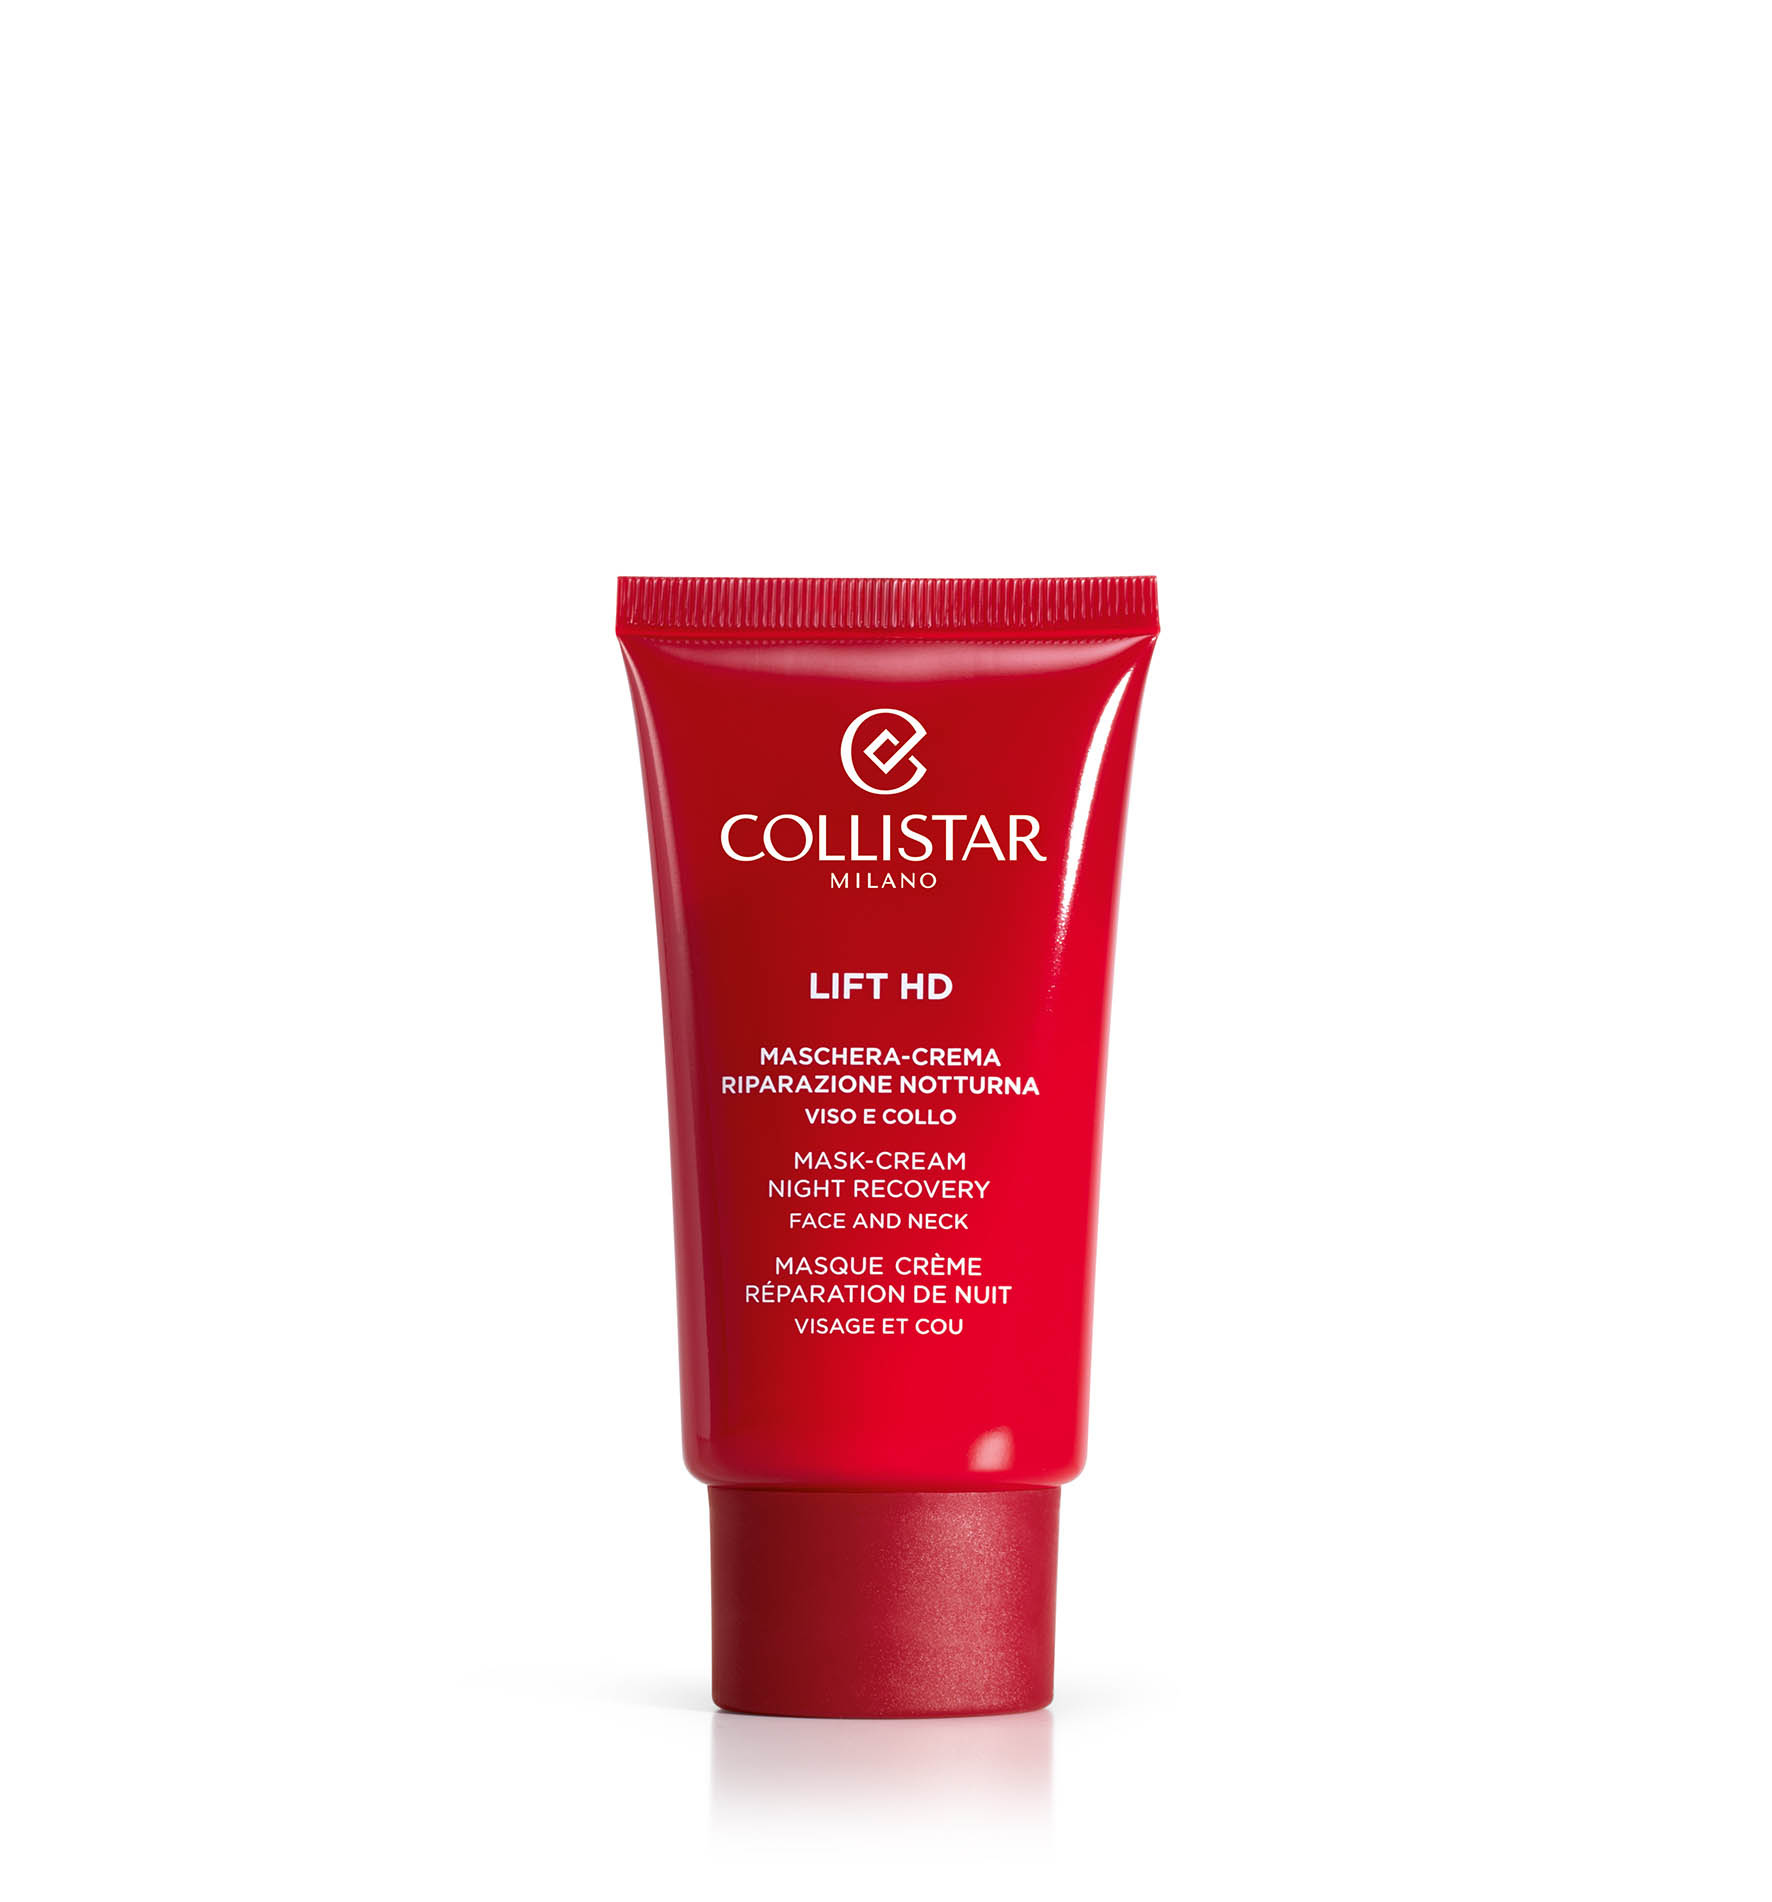 MASK-CREAM NIGHT RECOVERY FACE AND NECK - Dry skin | Collistar - Shop Online Ufficiale